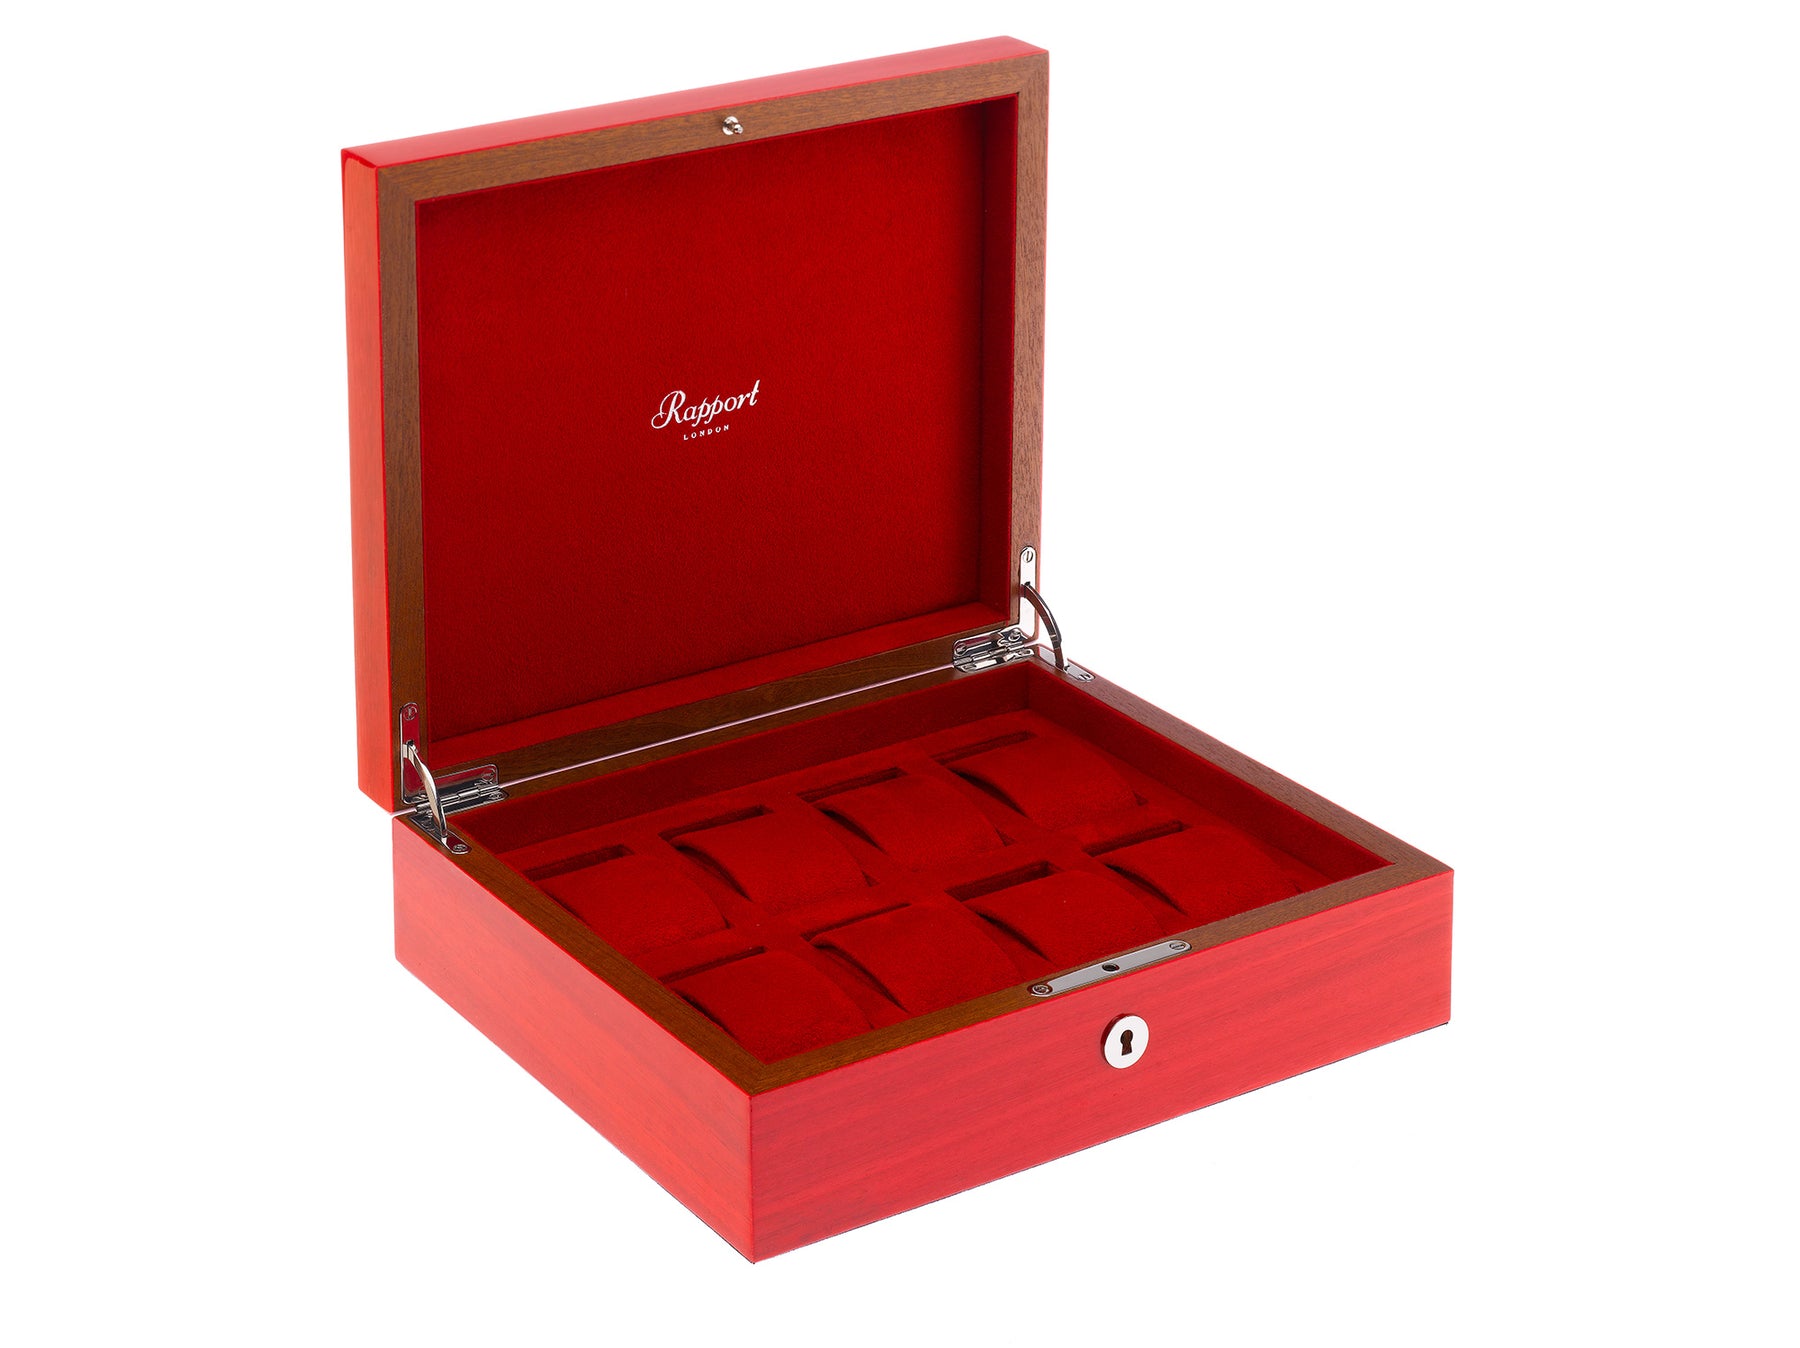 rapport-8-piece-watch-box-heritage-red-l421 – 3.0